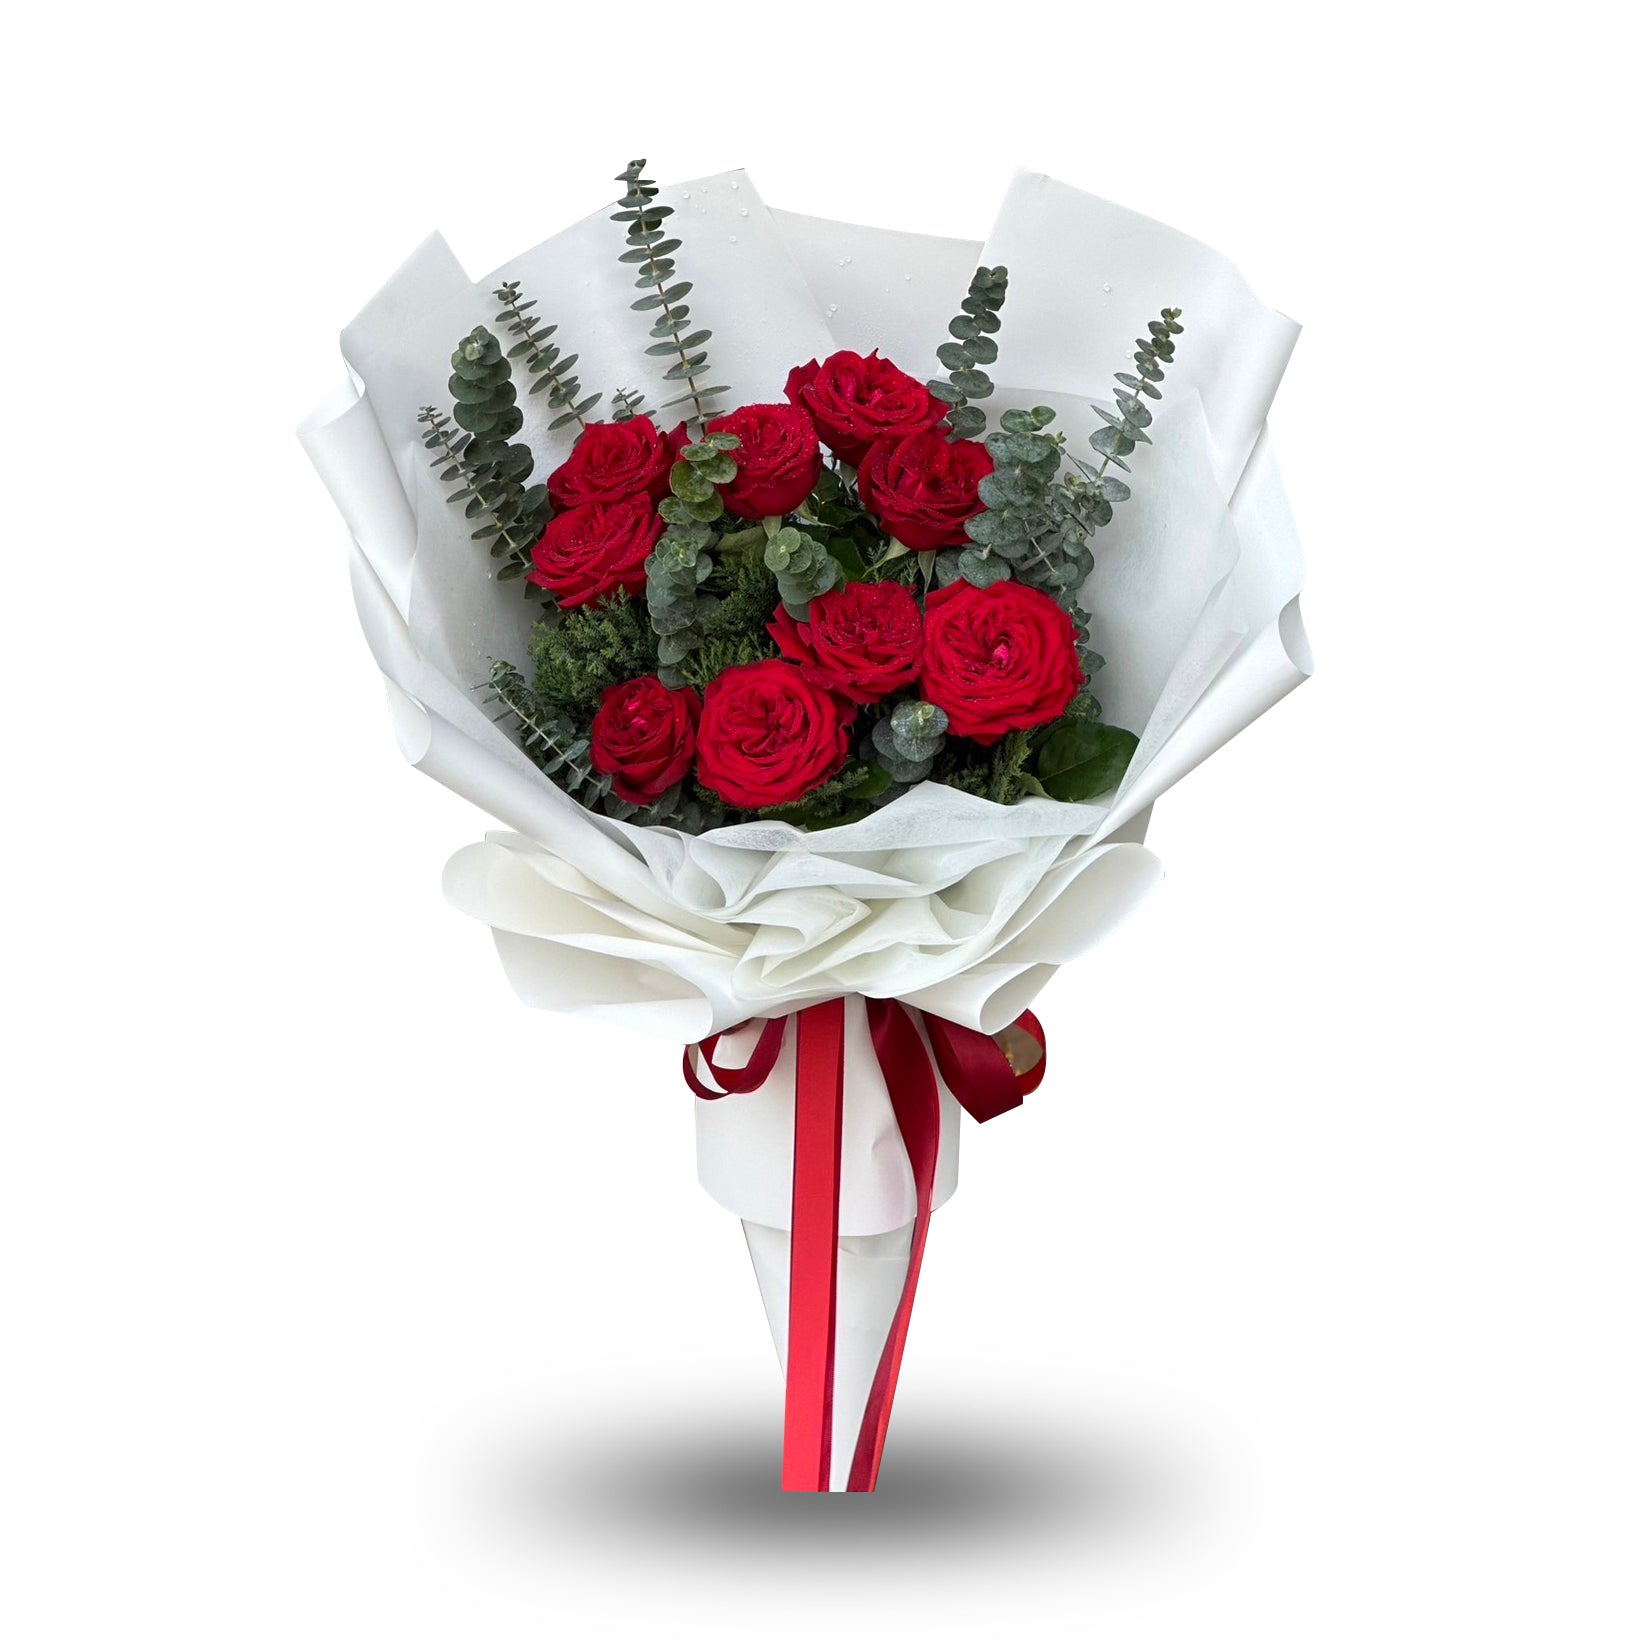 "My Baby" bouquet of 10 red roses